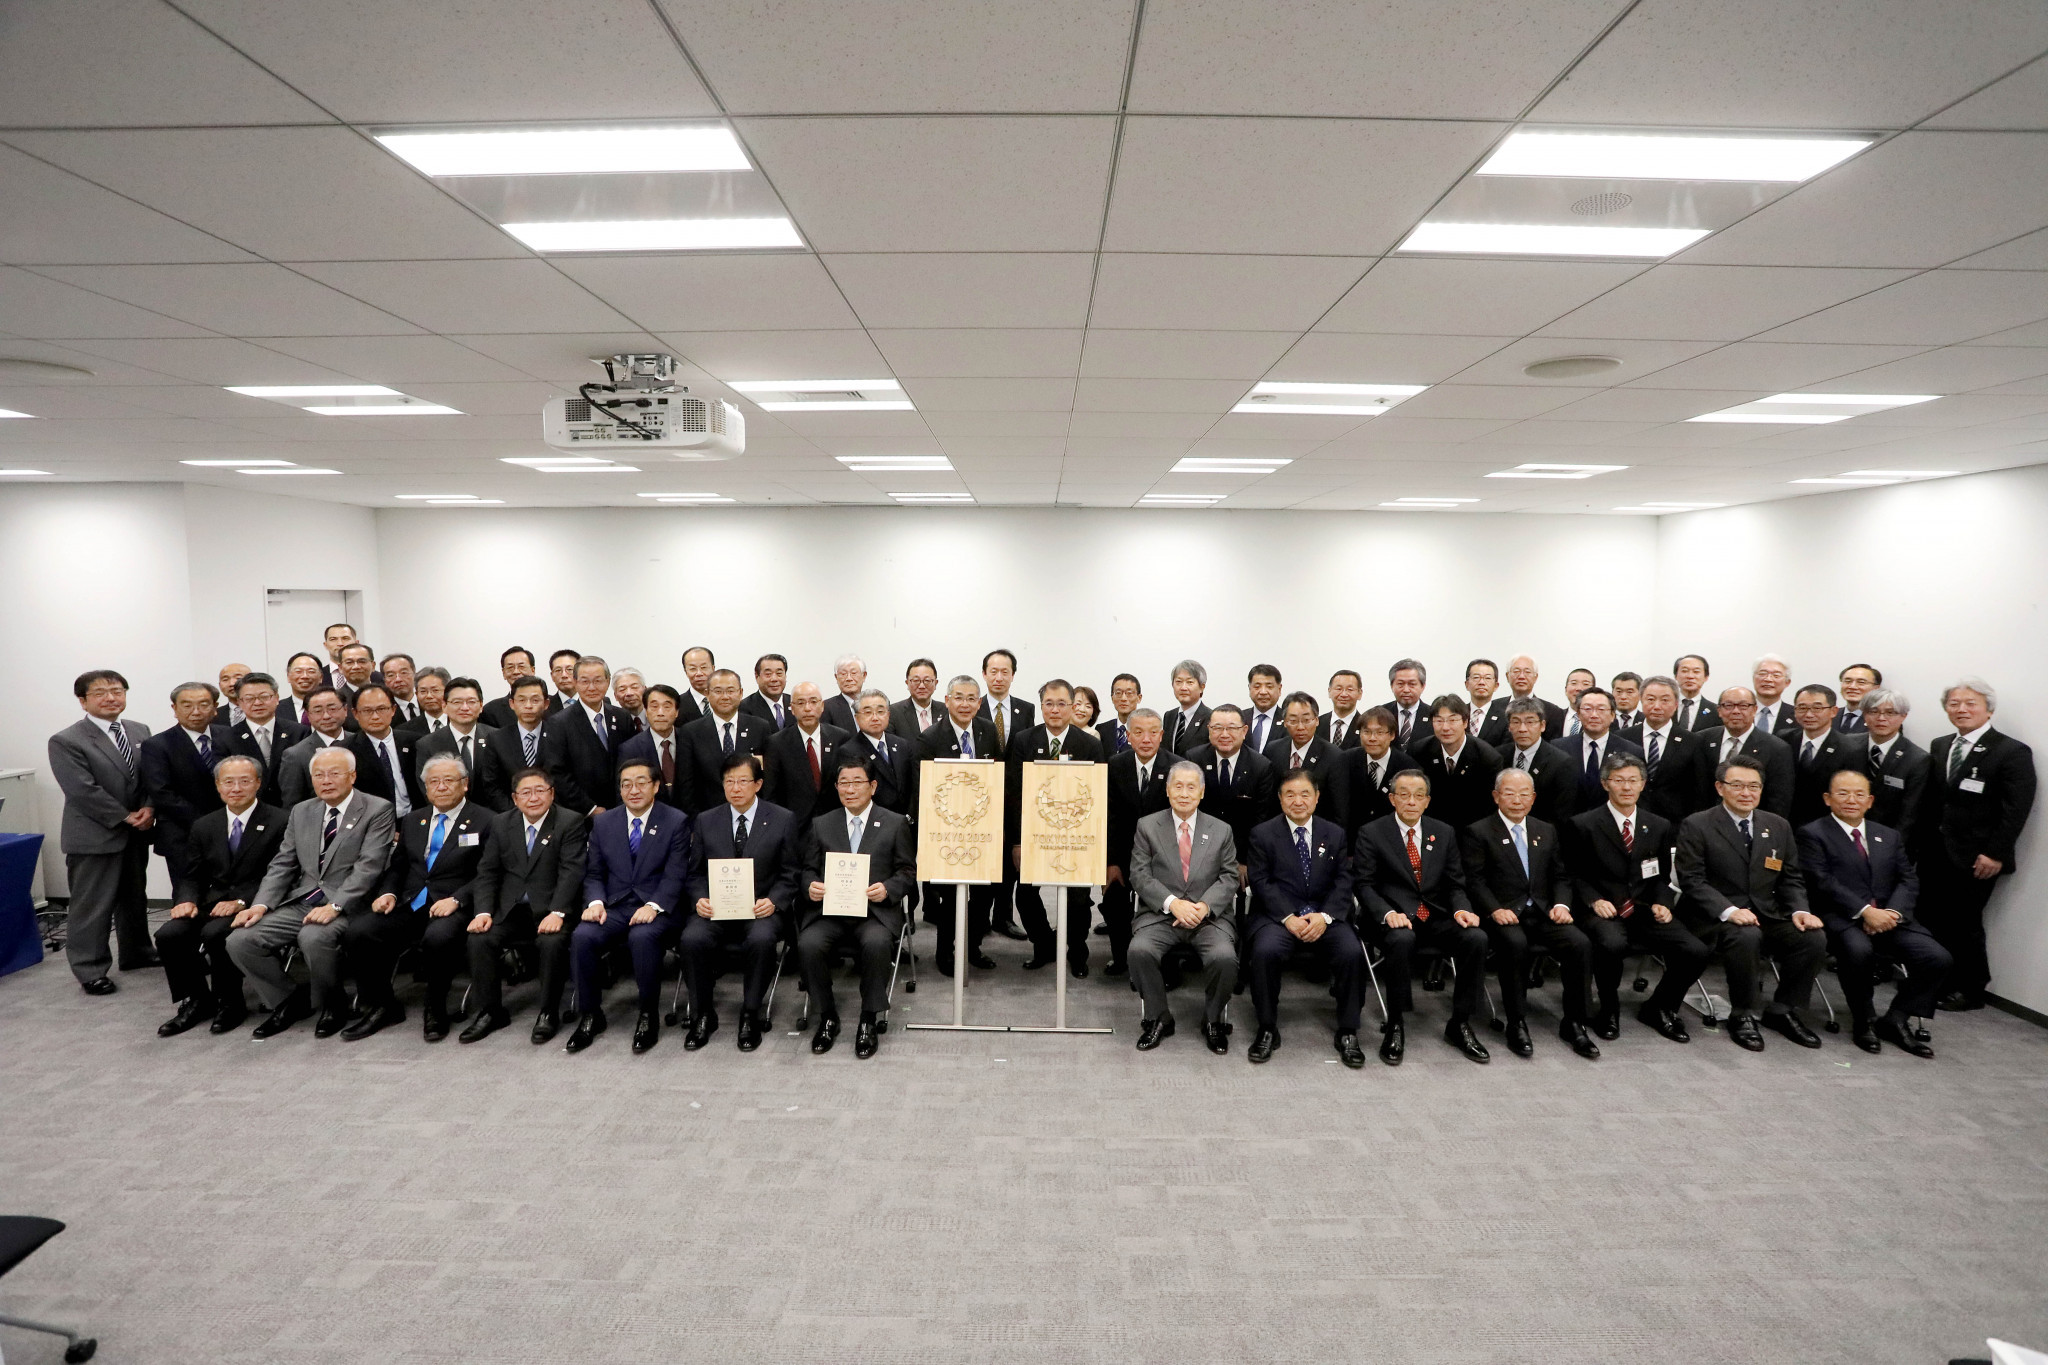 The unveiling of the emblems took place in a ceremony in Tokyo ©Tokyo 2020